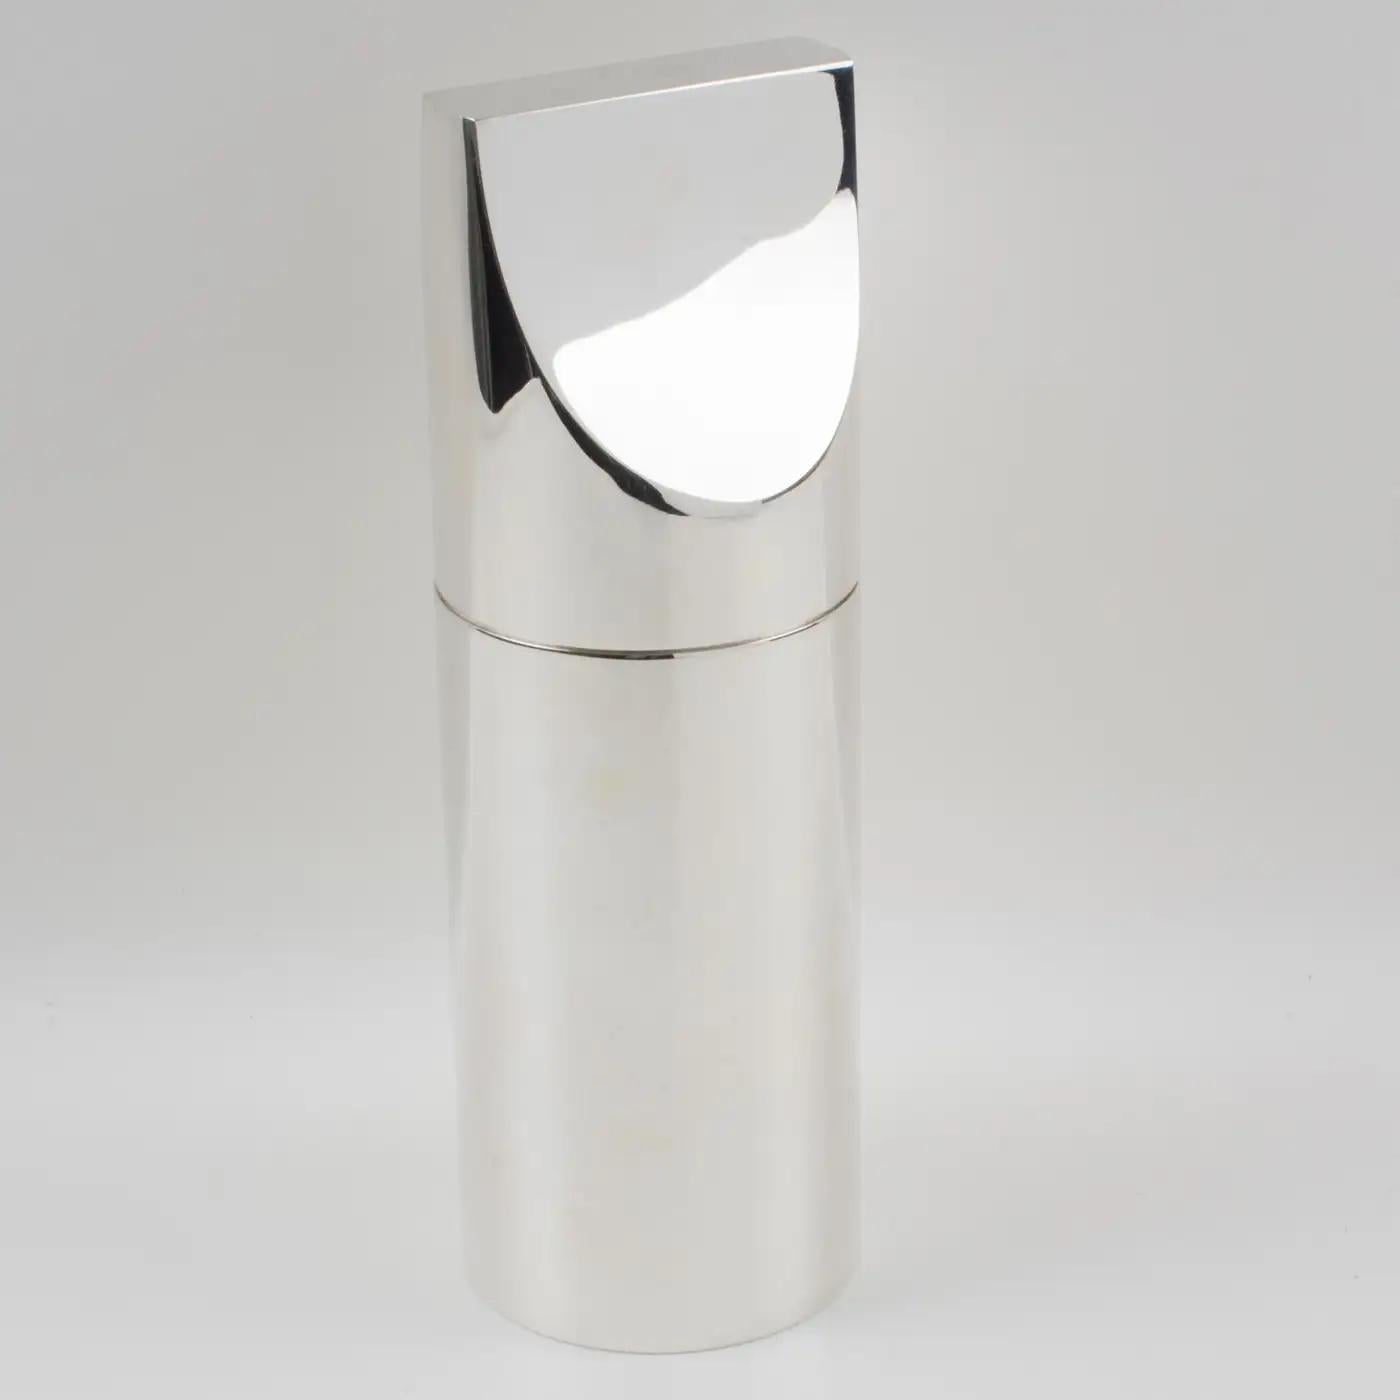 Lino Sabattini for Sabattini Argenteria designed this elegant silver plate decorative box circa 1980. This tall-lidded box has a minimalist geometric design and can be displayed as a sculptural object or used as a storage box. The piece is marked